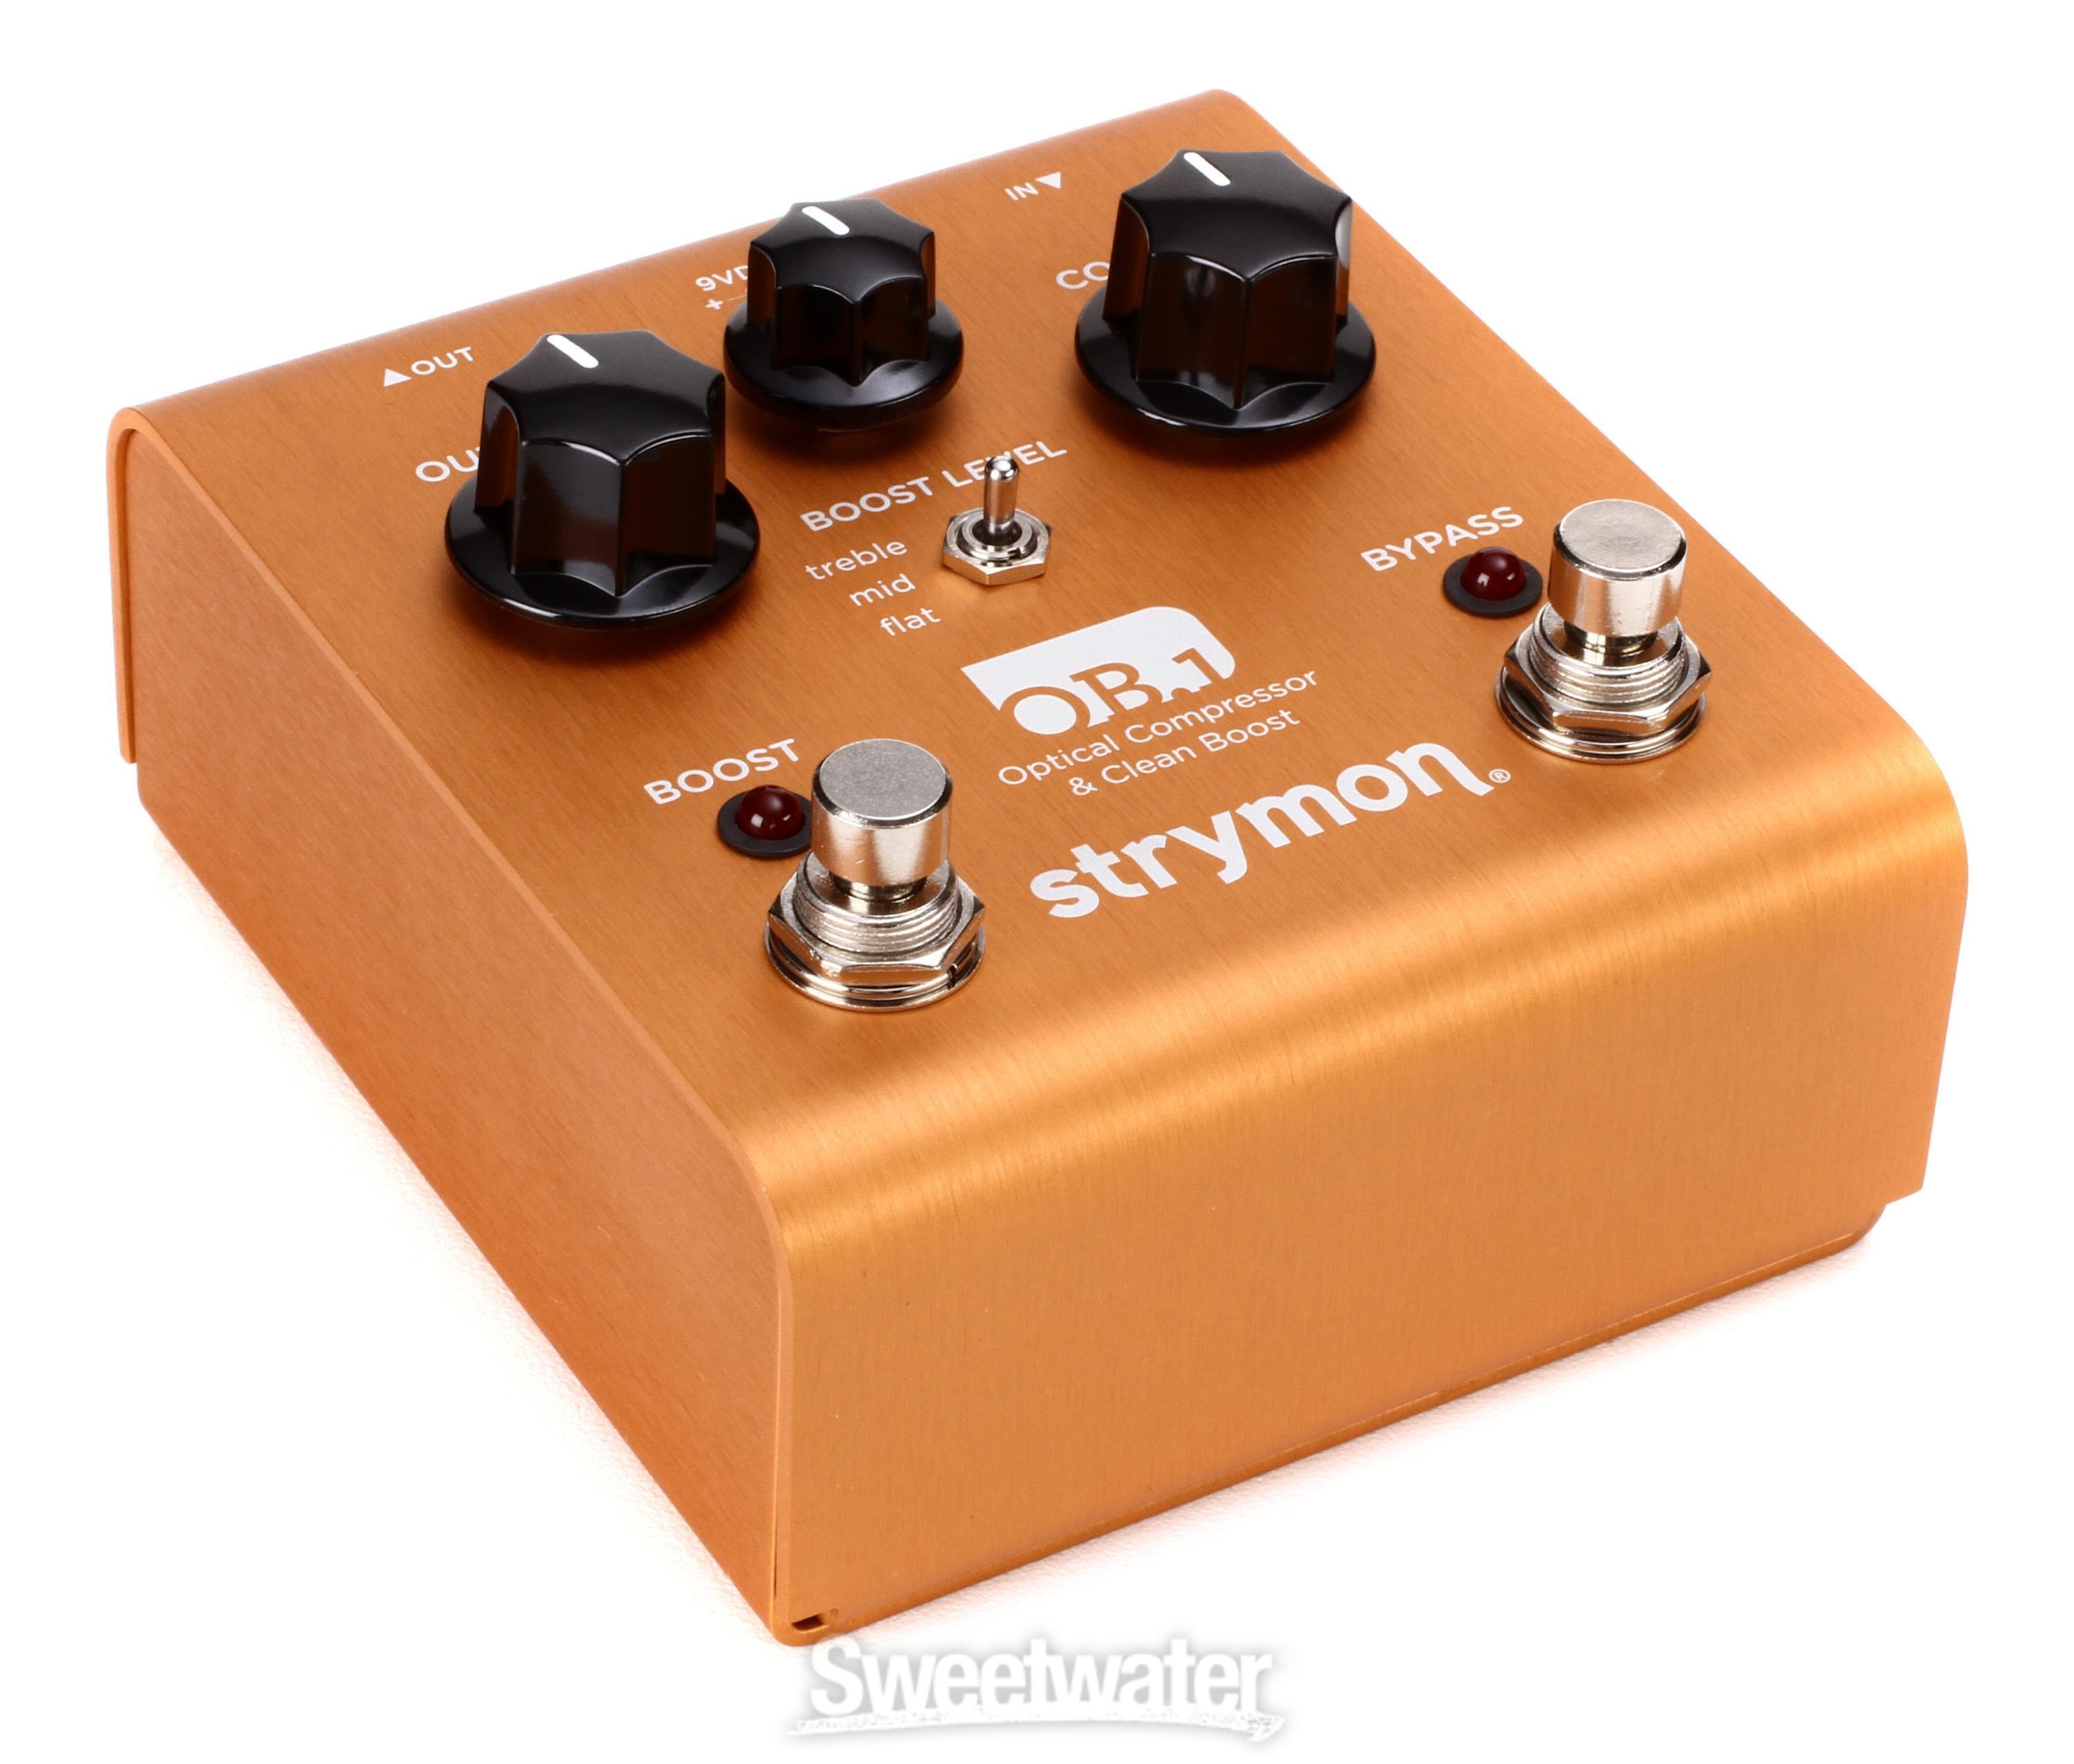 Strymon OB.1 Optical Compressor & Clean Boost Pedal | Sweetwater